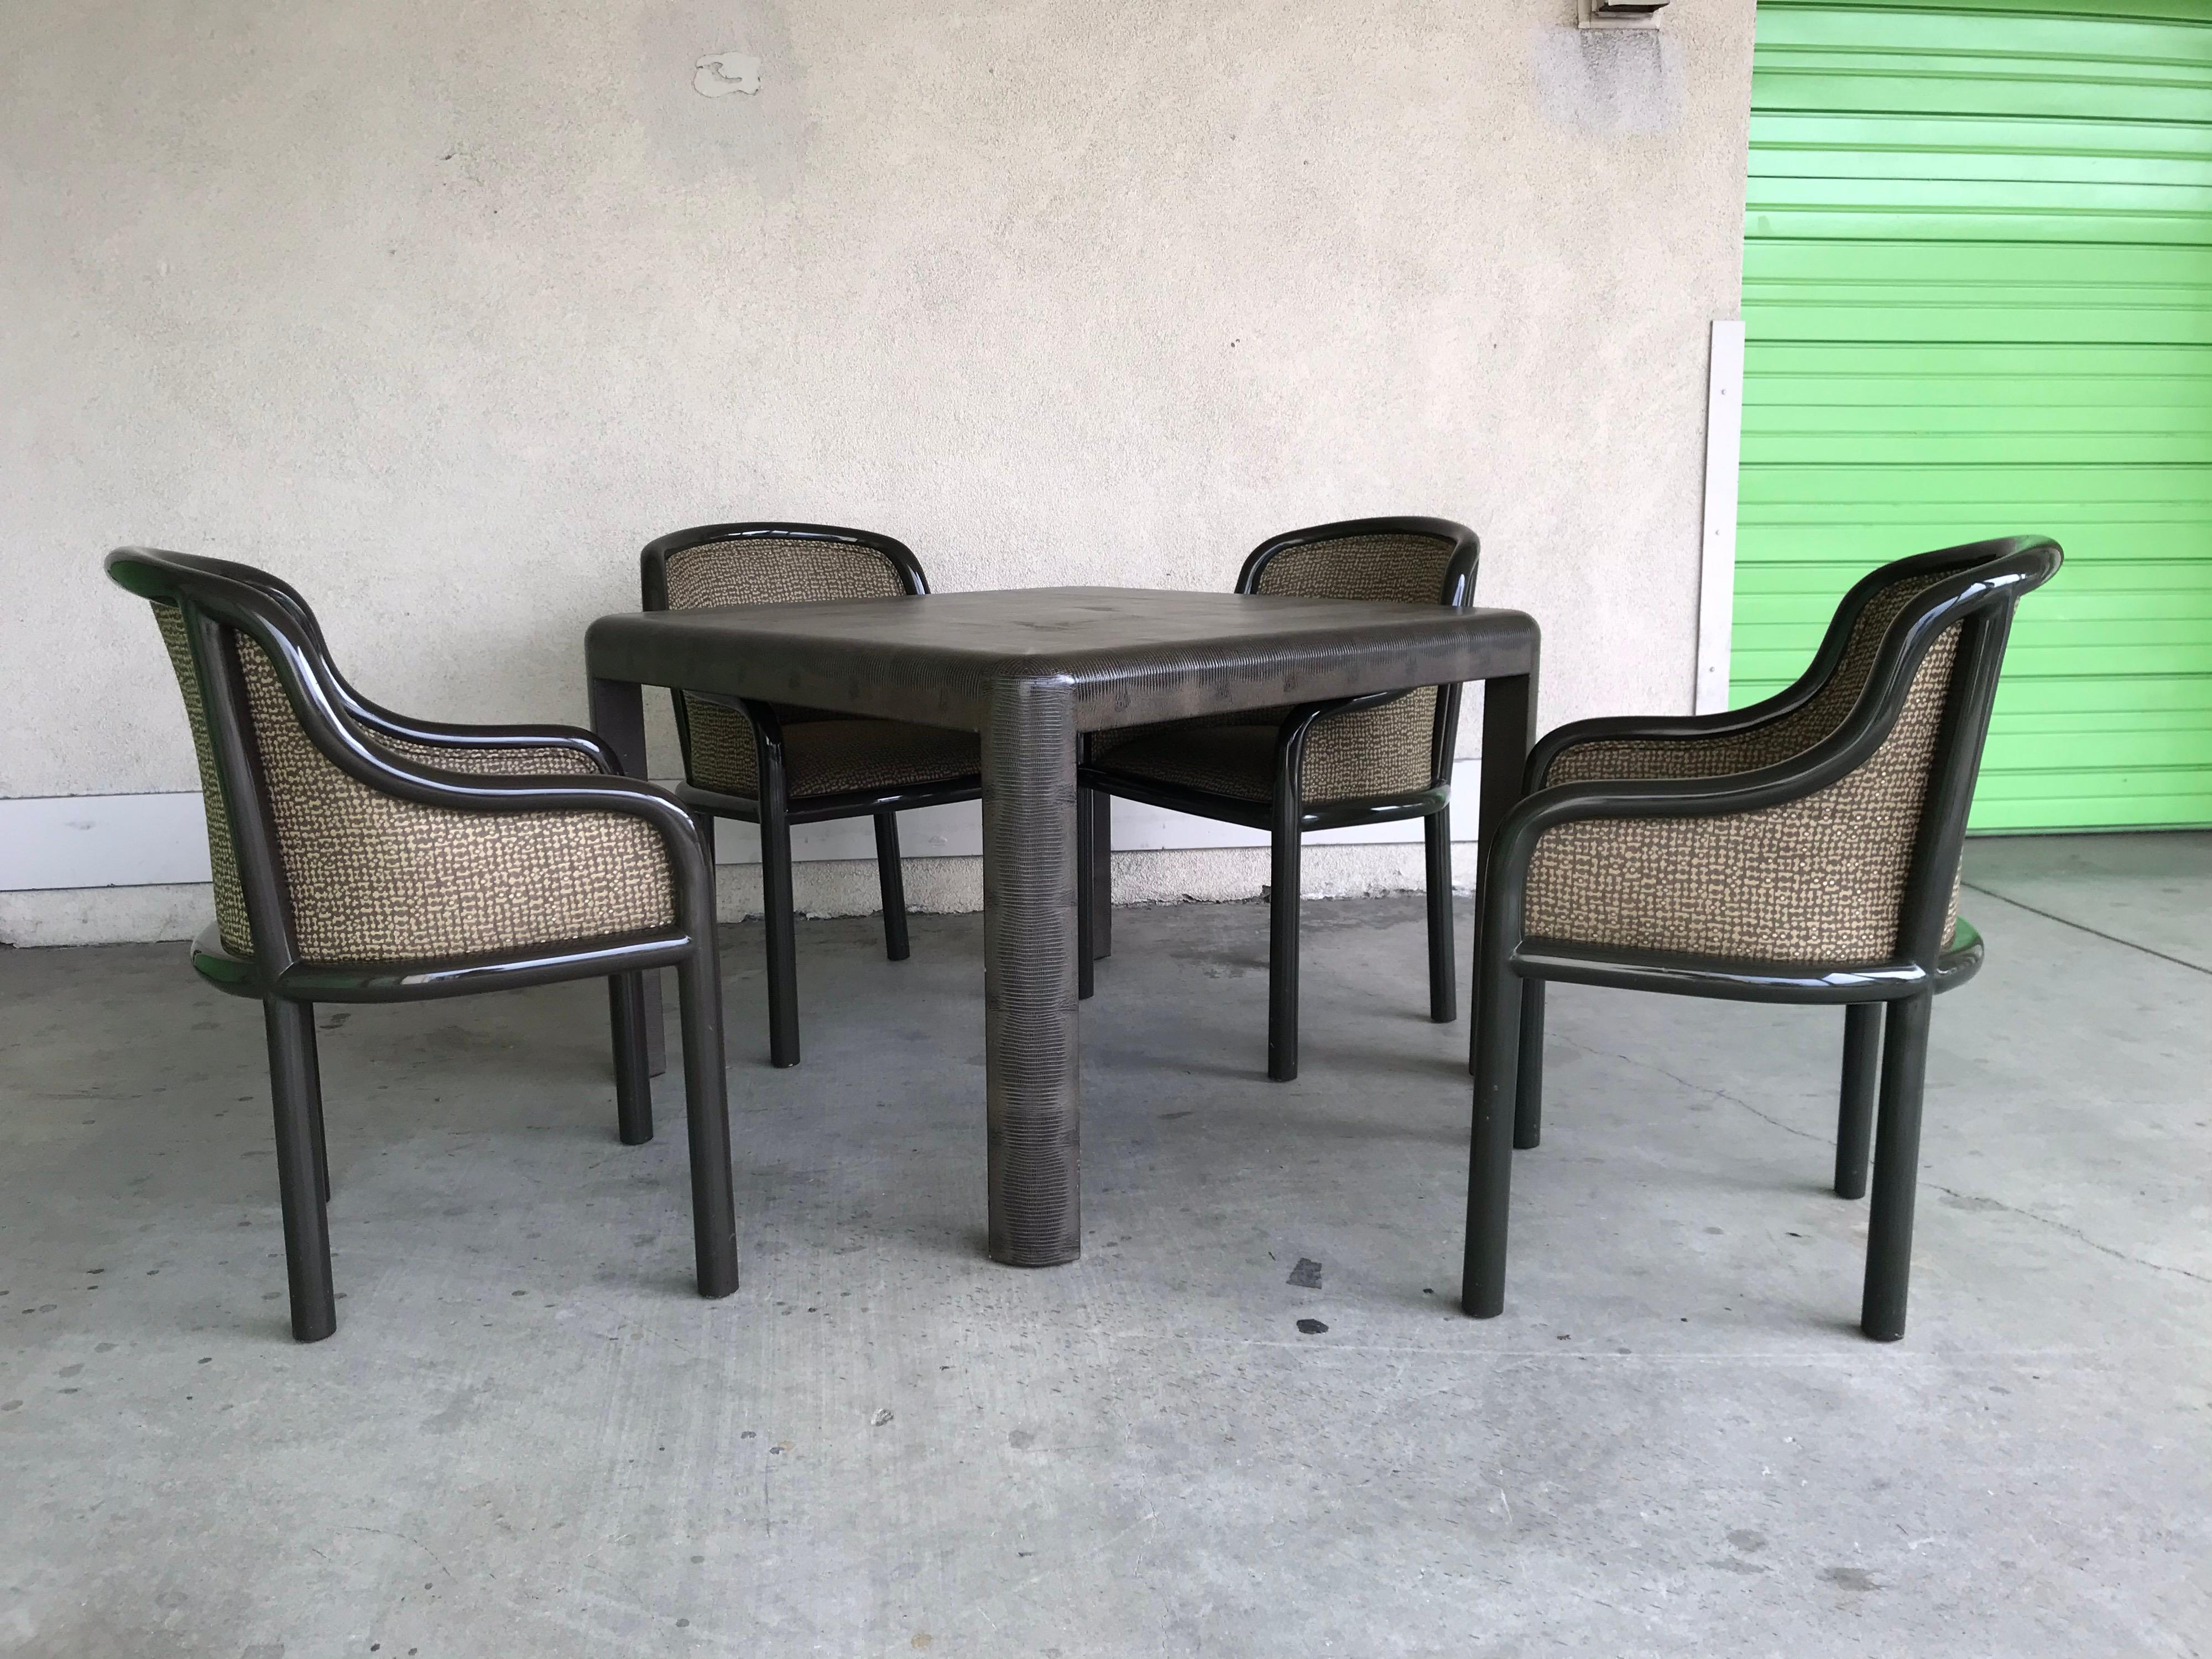 A handsome and elegant design.
The table is constructed of wood and wrapped with leather embossed snake skin pattern in gun metal hue. The size is 29